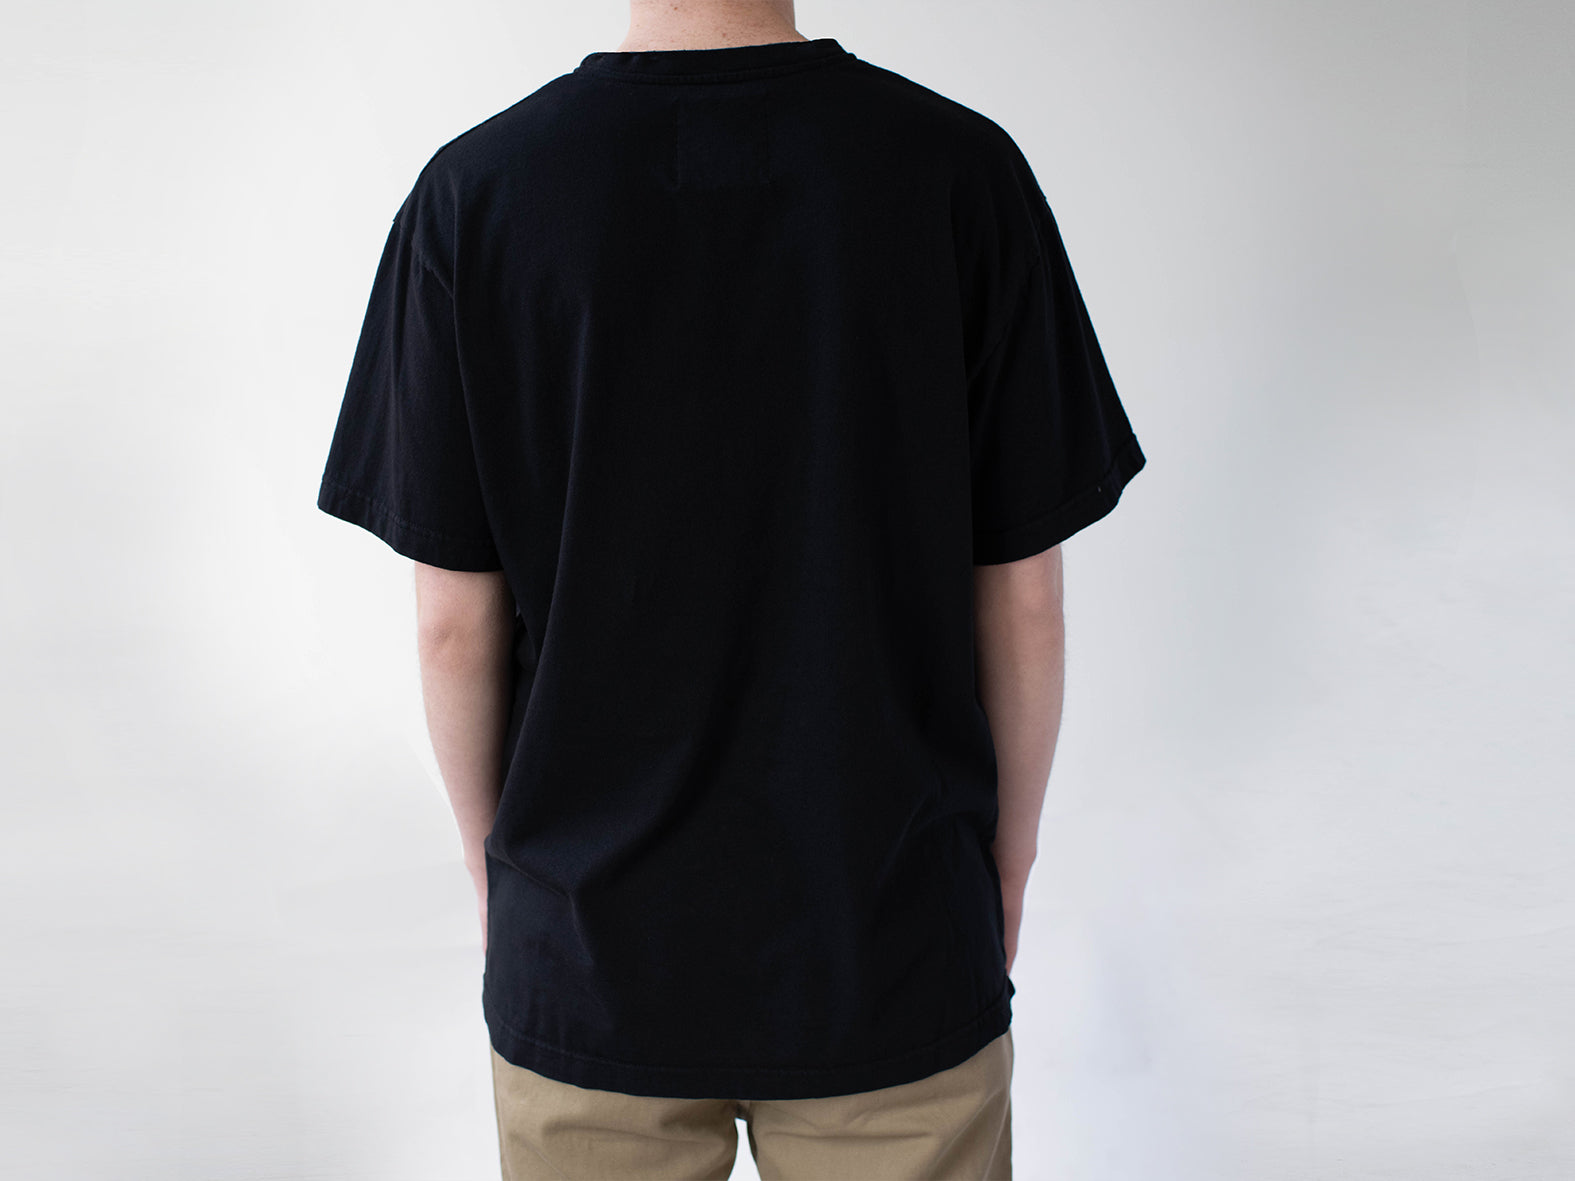 Nº A. OVERSIZE FIT TEE. BLACK.